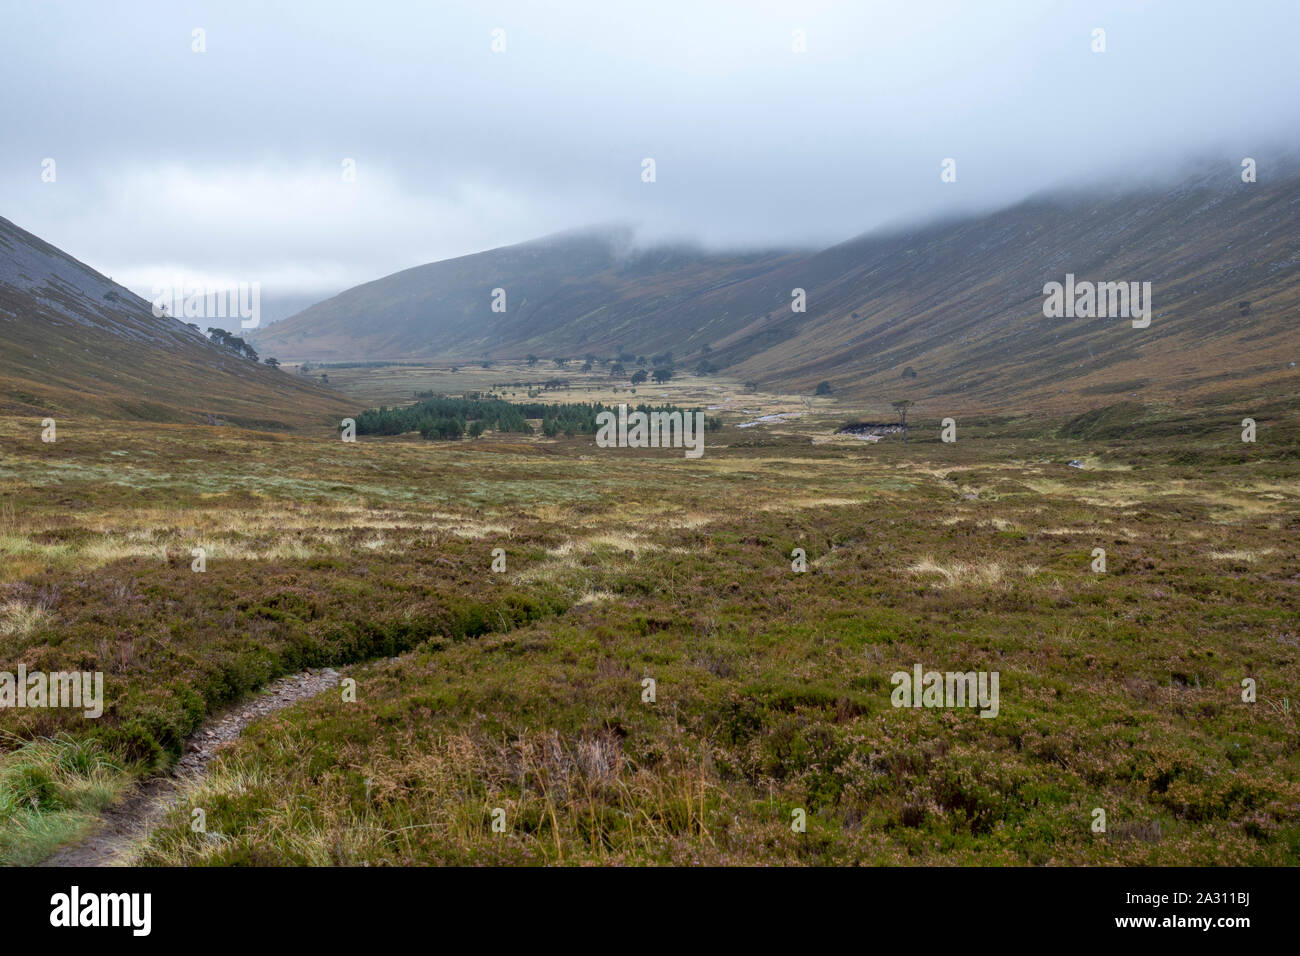 The Glen Lui and Glen Derry route in the Cairngorms National Park that takes you up to Ben Macdui the highest mountain in the park. Stock Photo